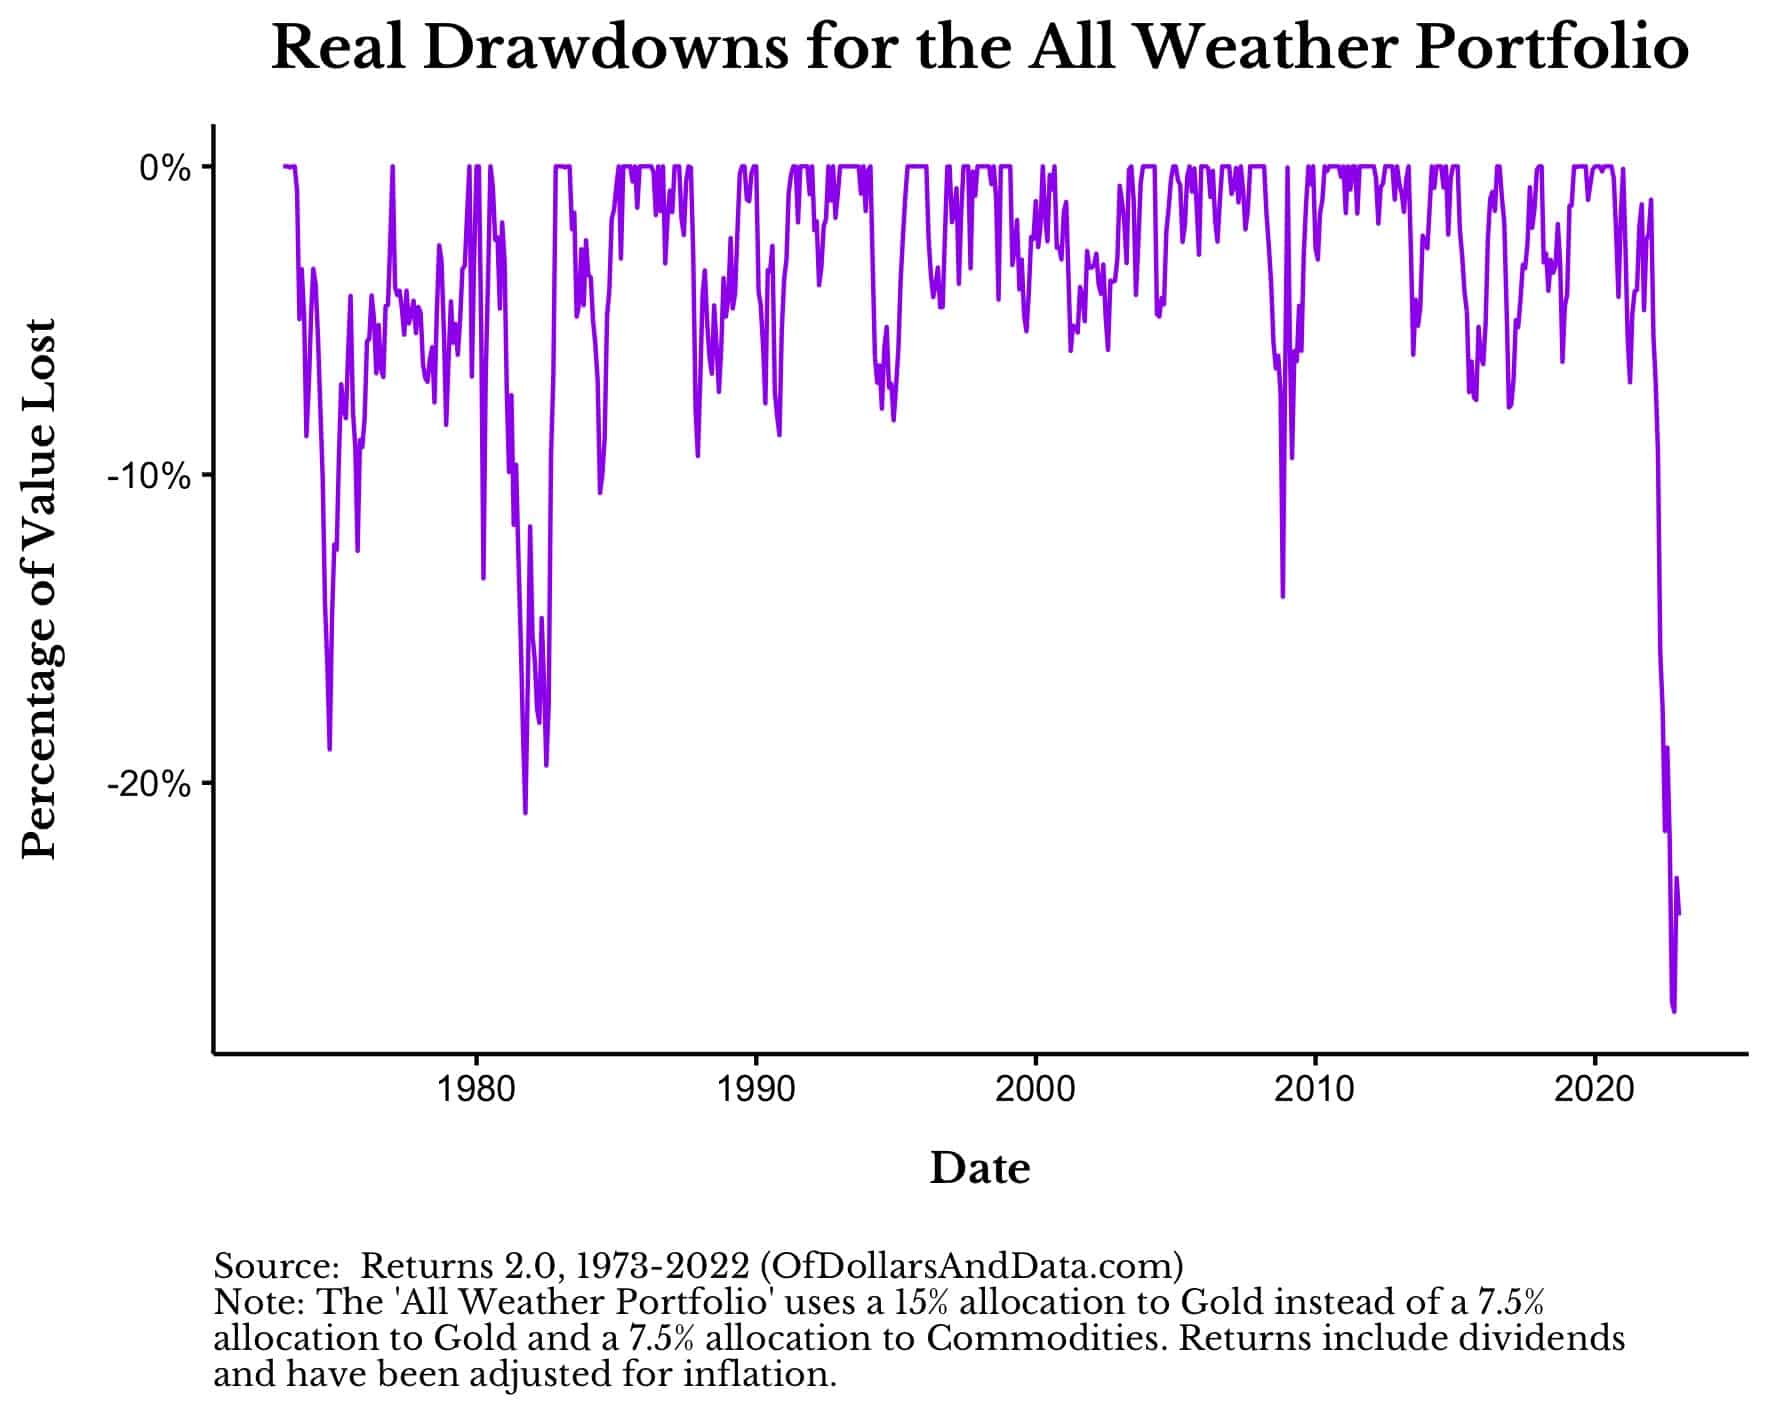 Real drawdowns of the All Weather Portfolio from 1973 to 2022.